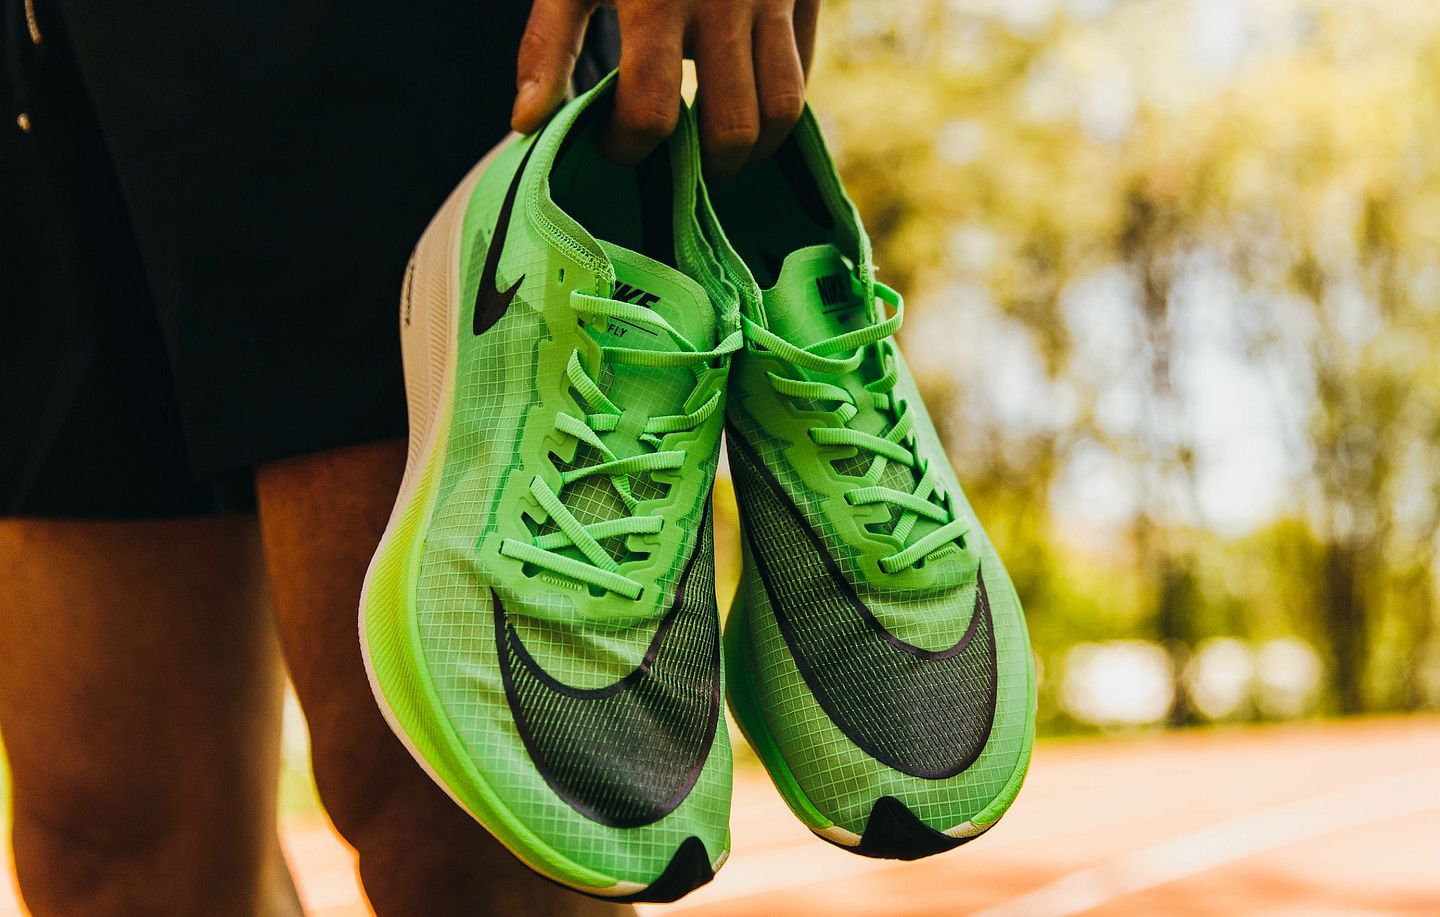 The Best Running Shoes For Men